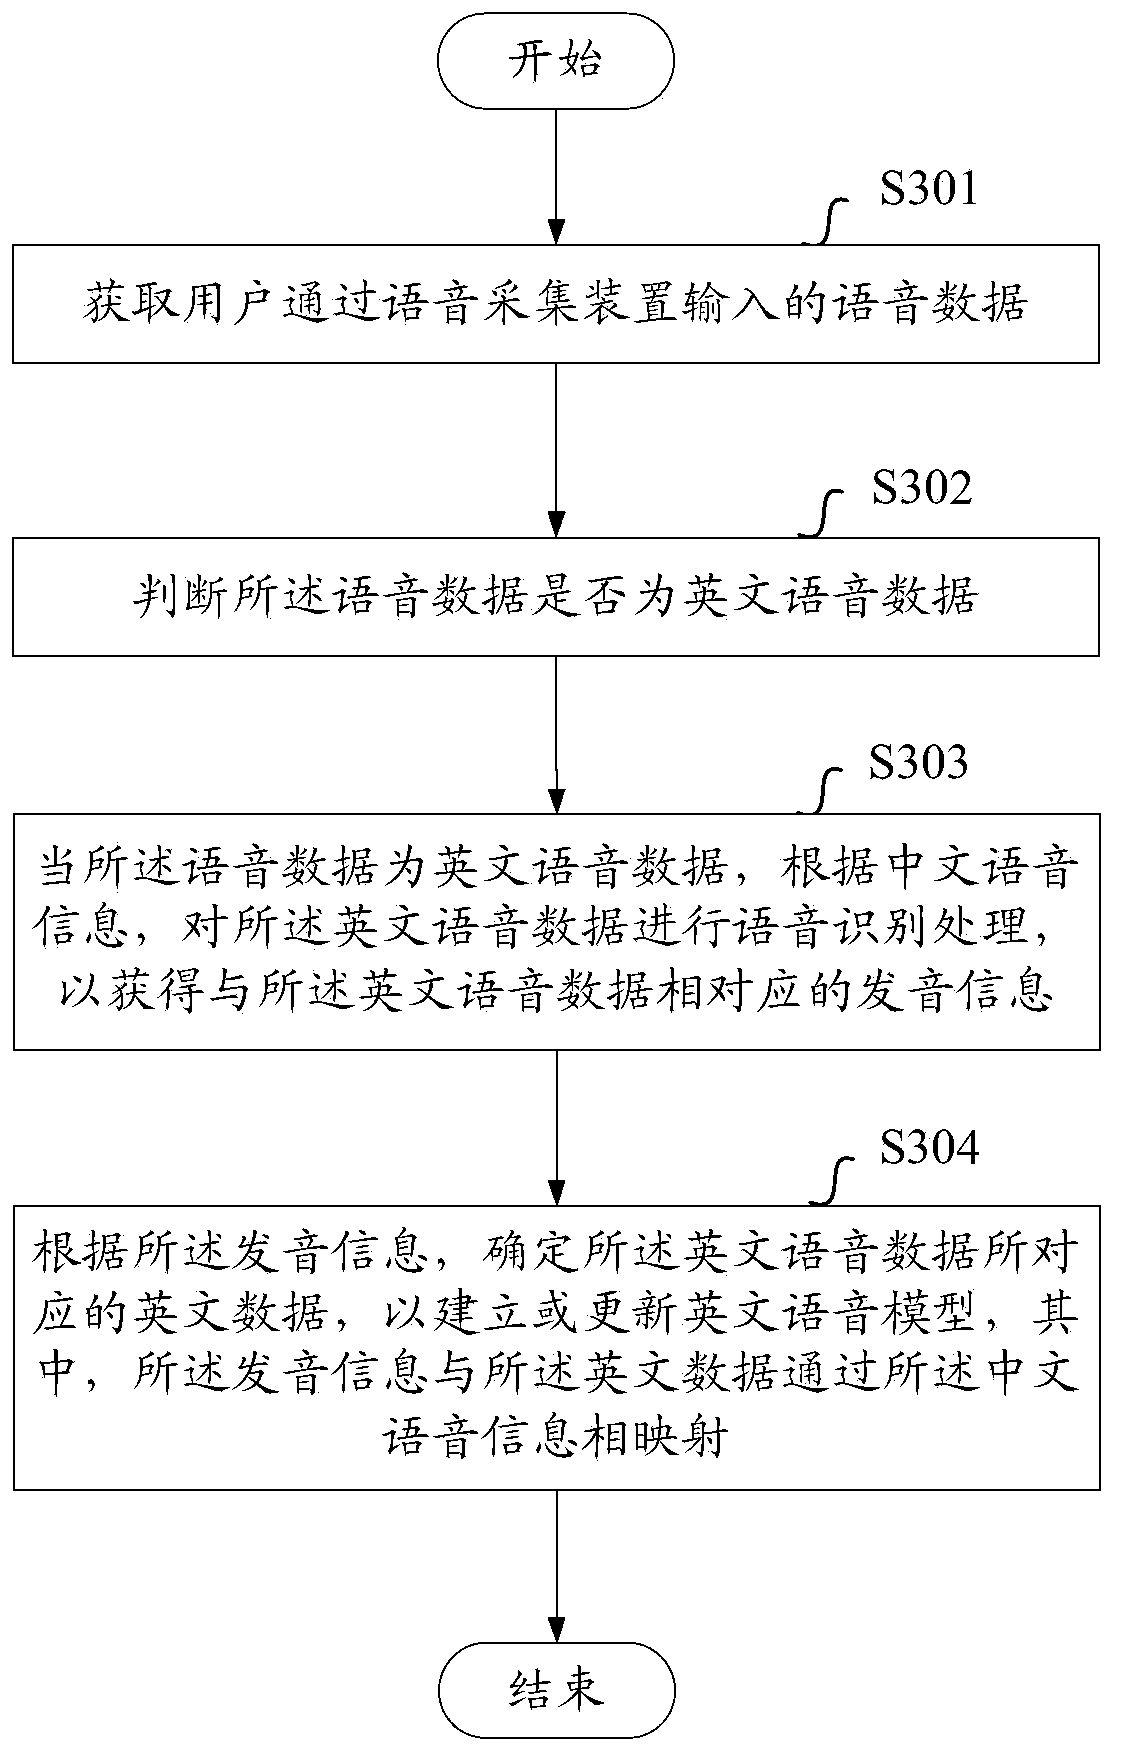 Method and apparatus for training English voice model based on Chinese voice information